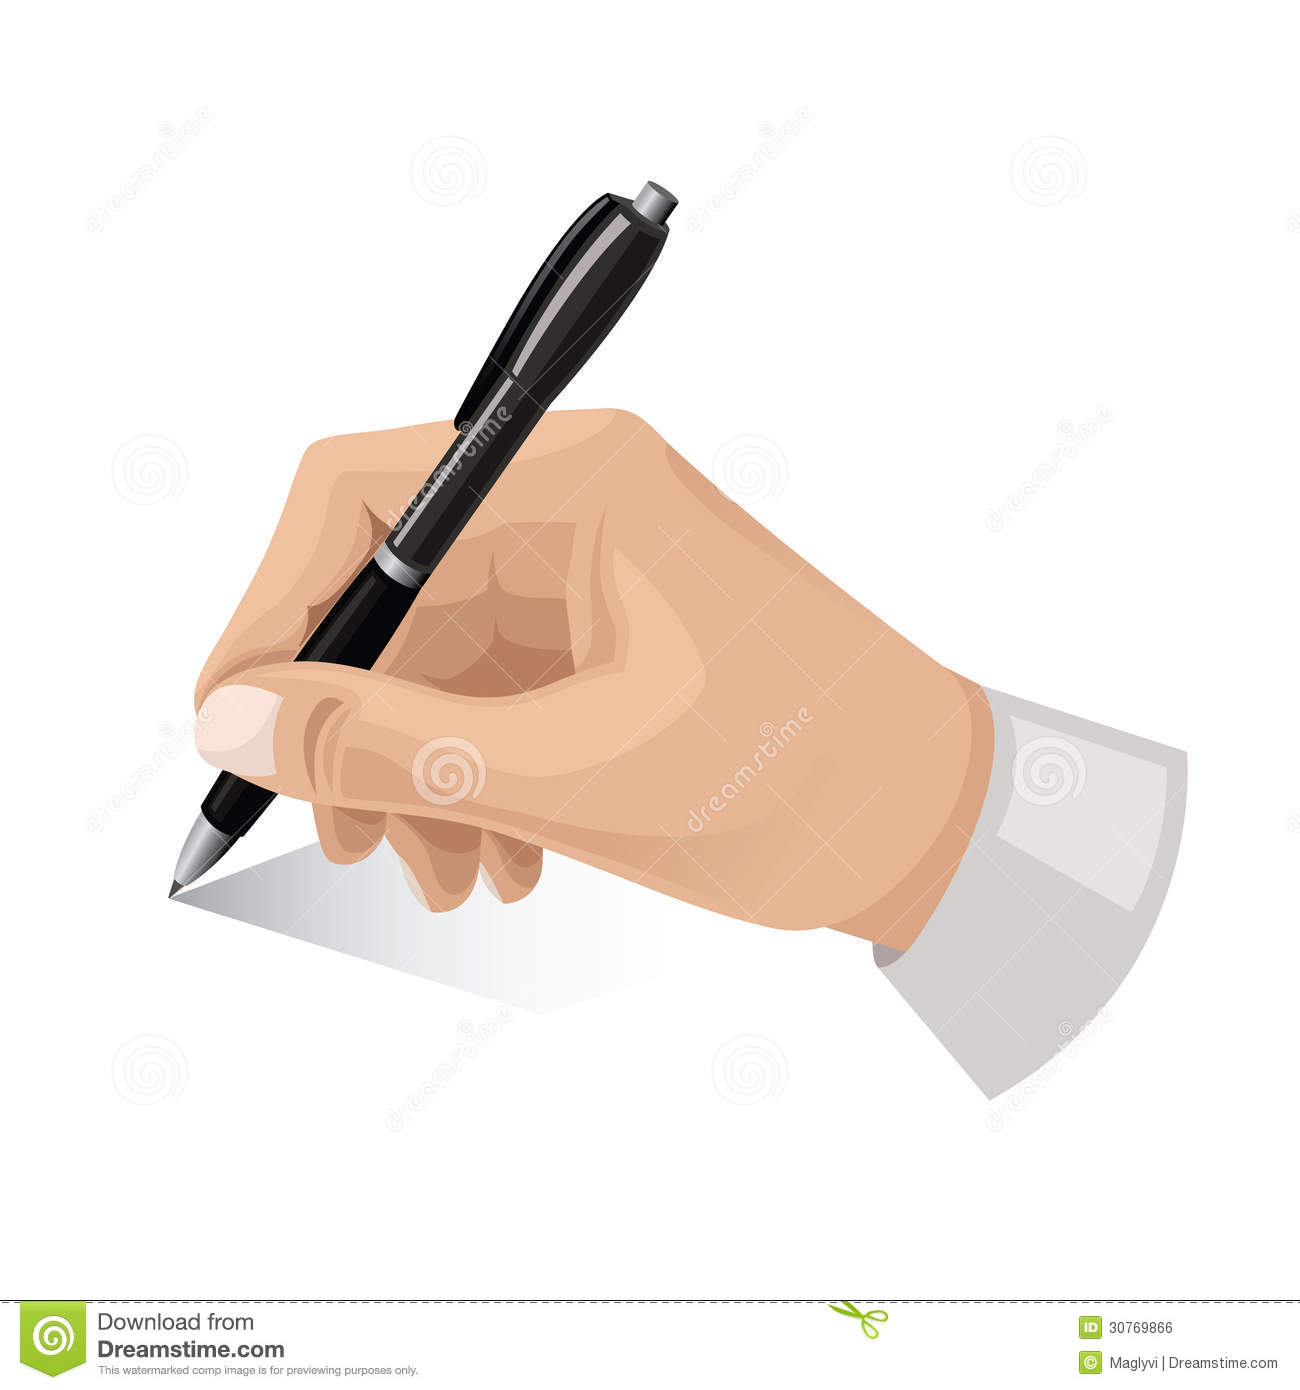 Hand With Pen Royalty Free Stock Image   Image  30769866